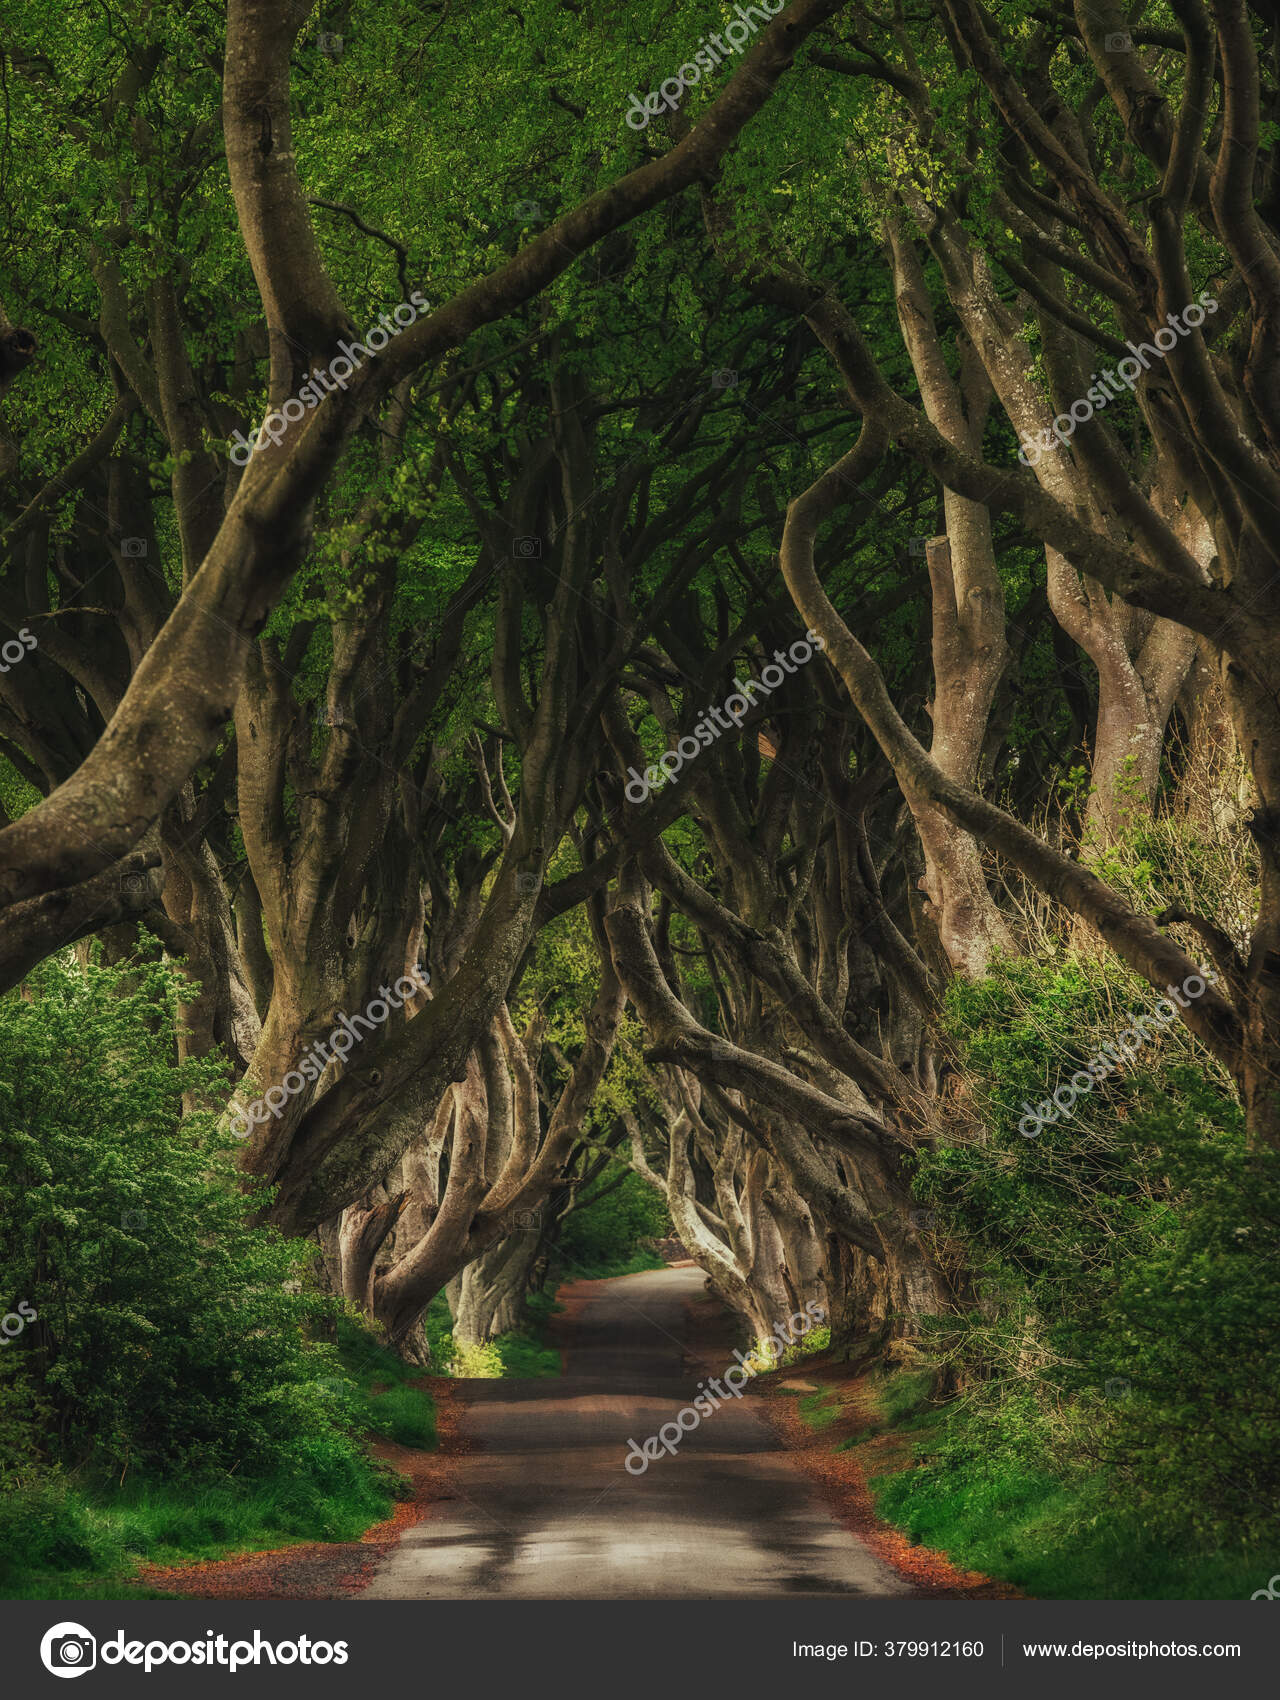 Forest And Road In Ireland Travel And Adventure Landscape With Alley Trees Dark Hedges Game Of Thrones Location Royalty Free Photo Stock Image By C Ladanivskyyo